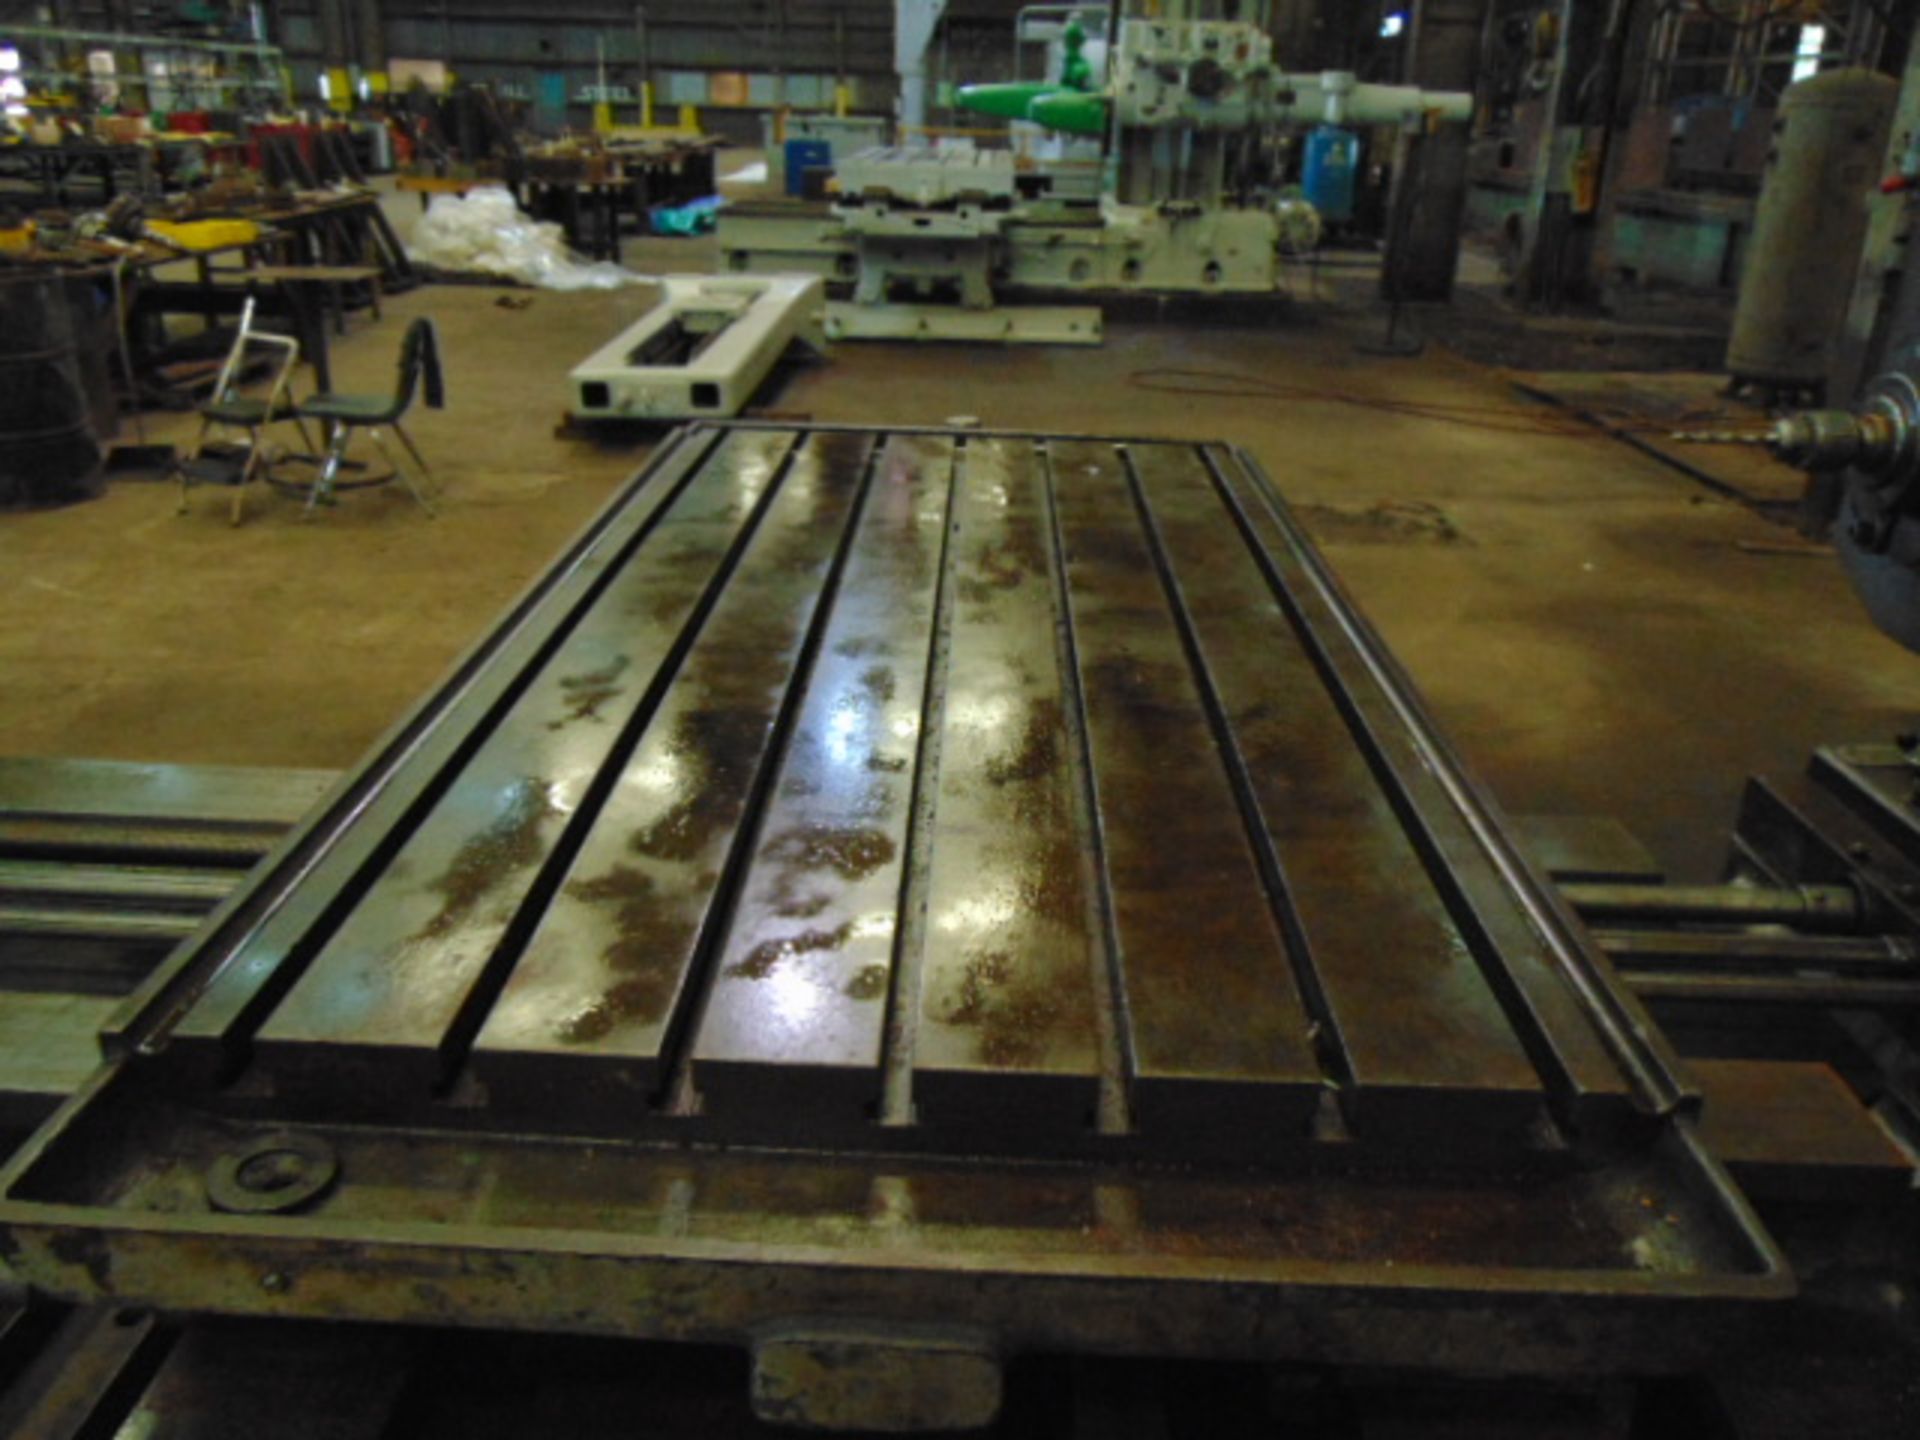 TABLE TYPE HORIZONTAL BORING MILL, LUCAS MDL. 428-60, 40" x 74" tbl., 60" cross travel, approx. - Image 13 of 16